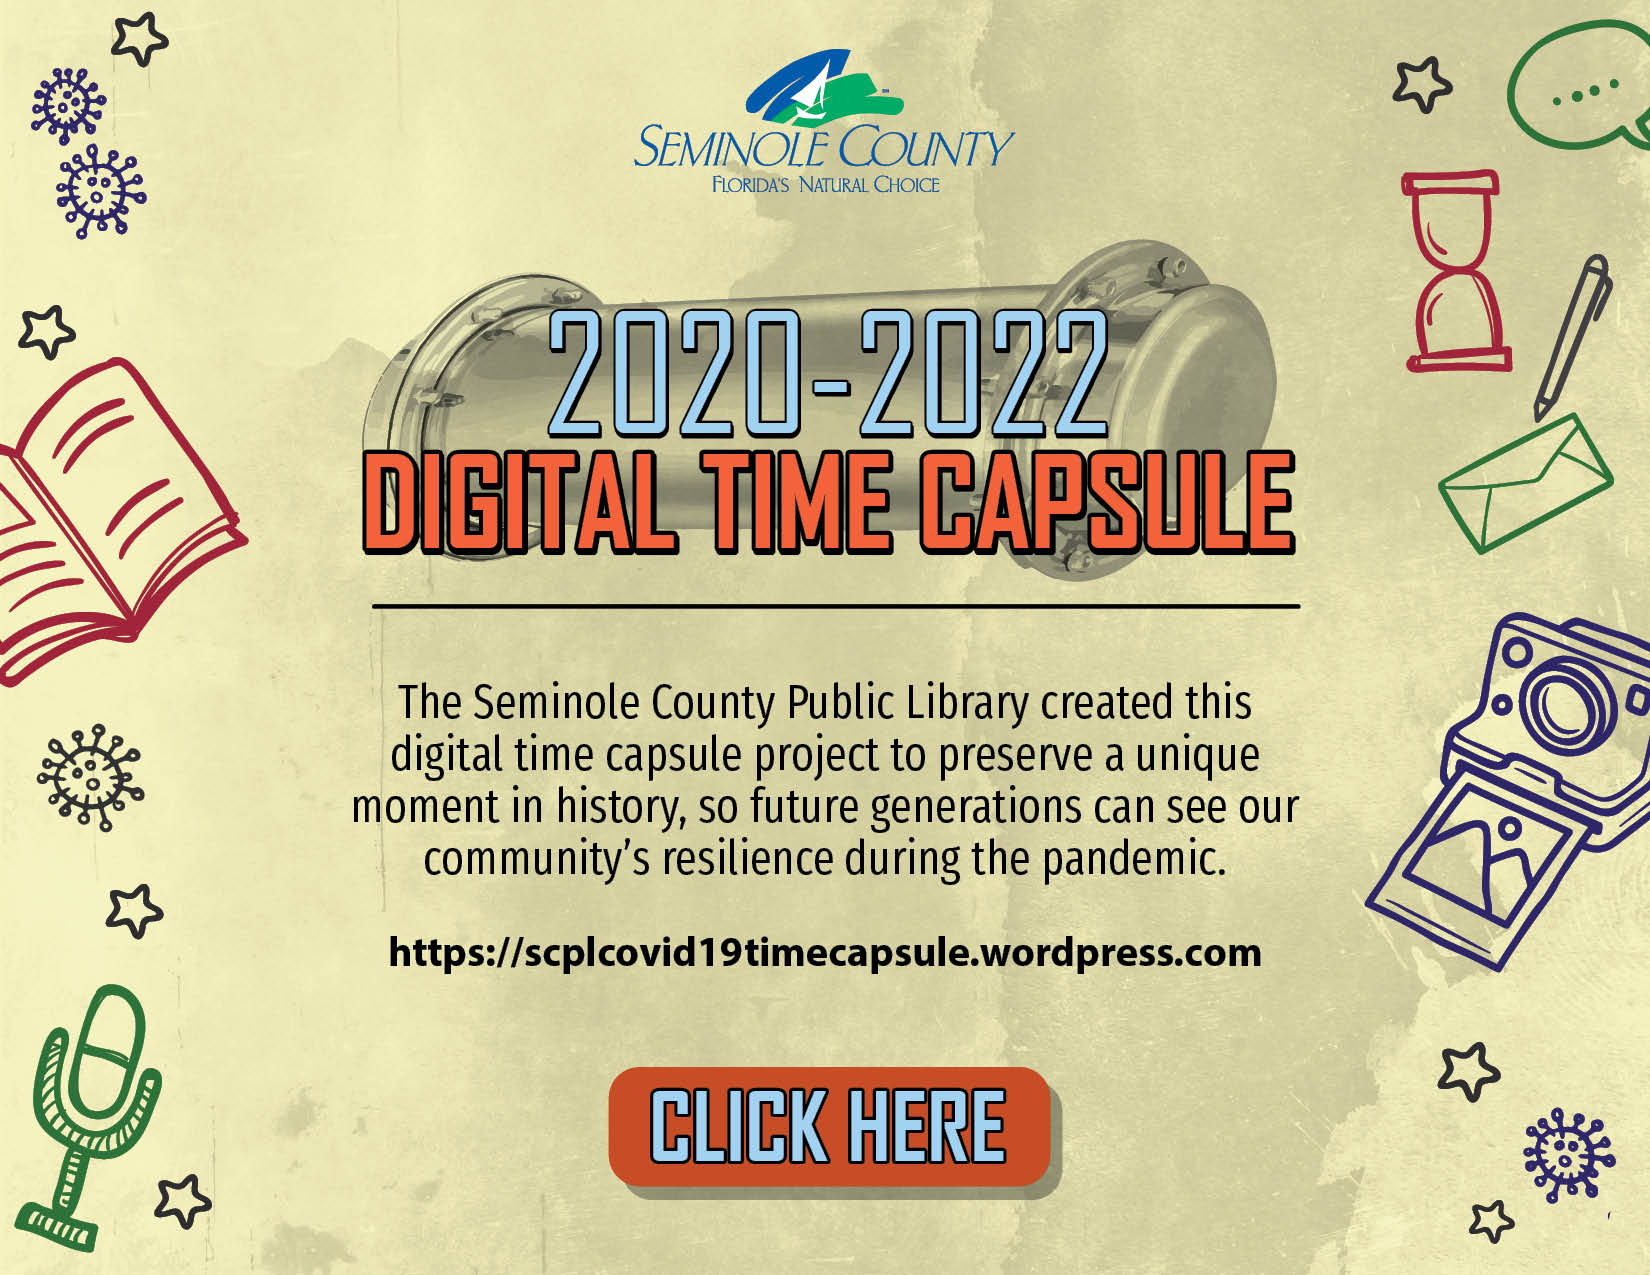 View the 2020-2022 Digital Time Capsule here